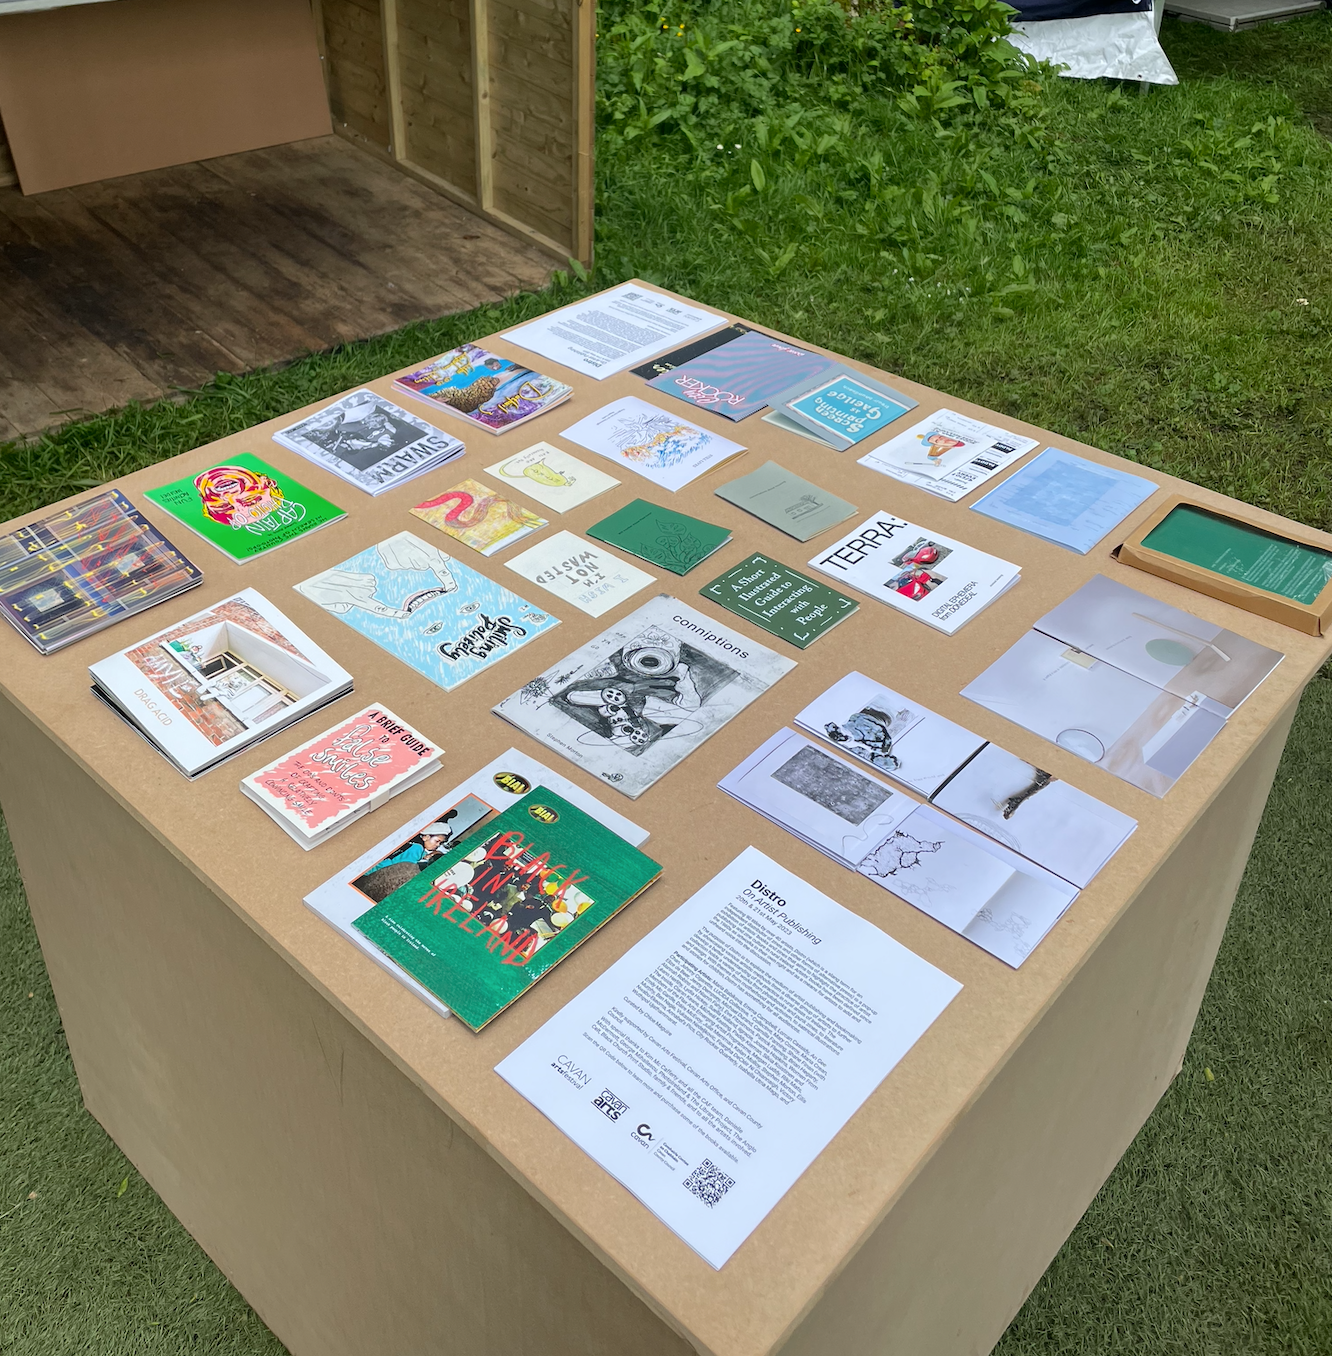 A table with many zines and books, all self-published by artists in Ireland